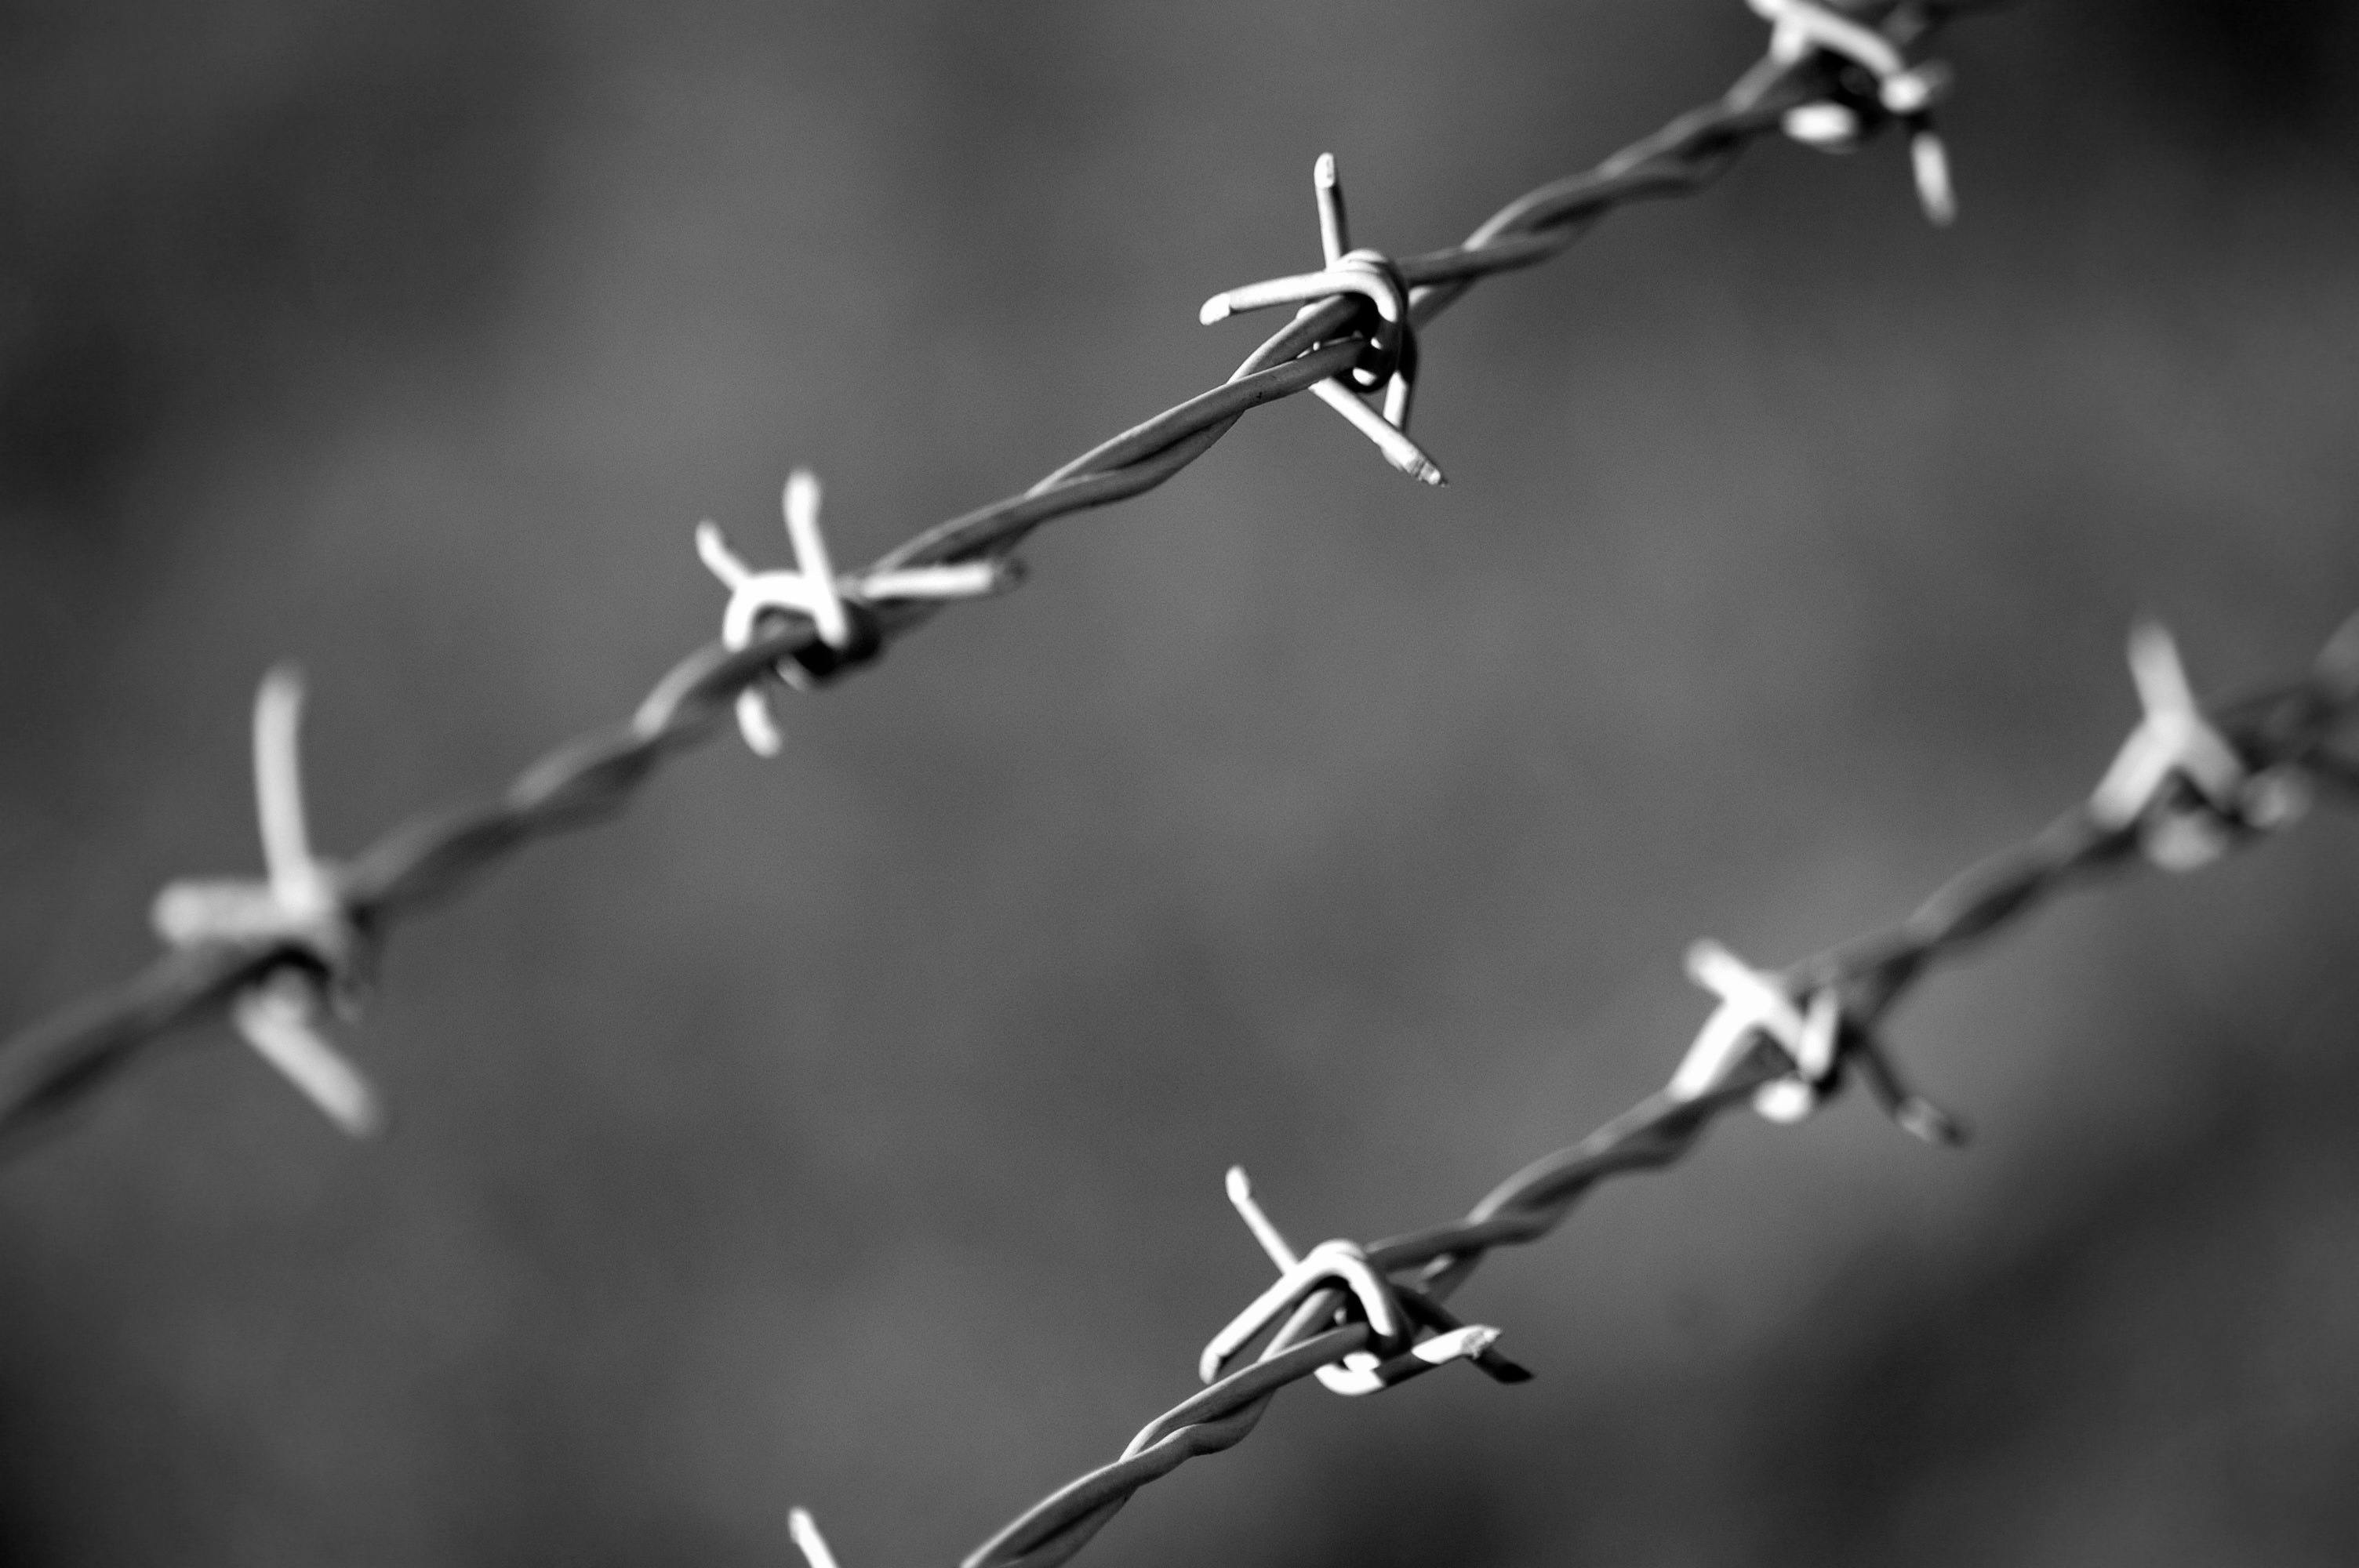 Grayscale Photo of Barbed Wire